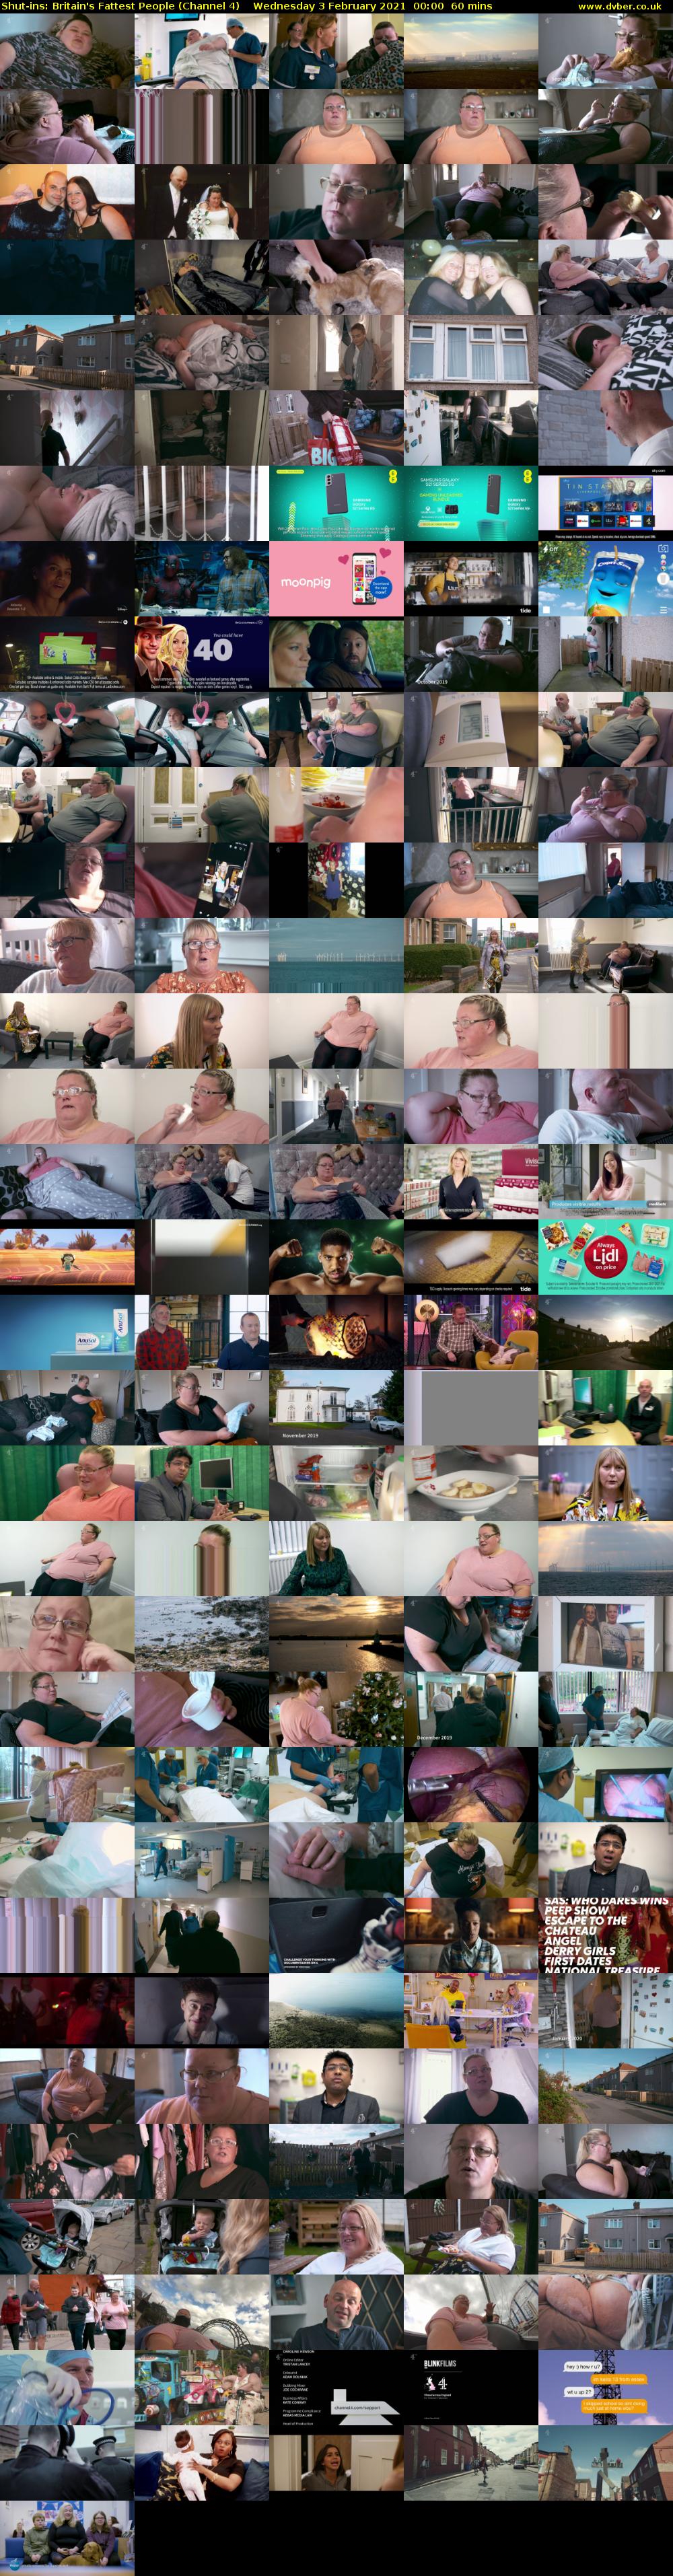 Shut-ins: Britain's Fattest People (Channel 4) Wednesday 3 February 2021 00:00 - 01:00